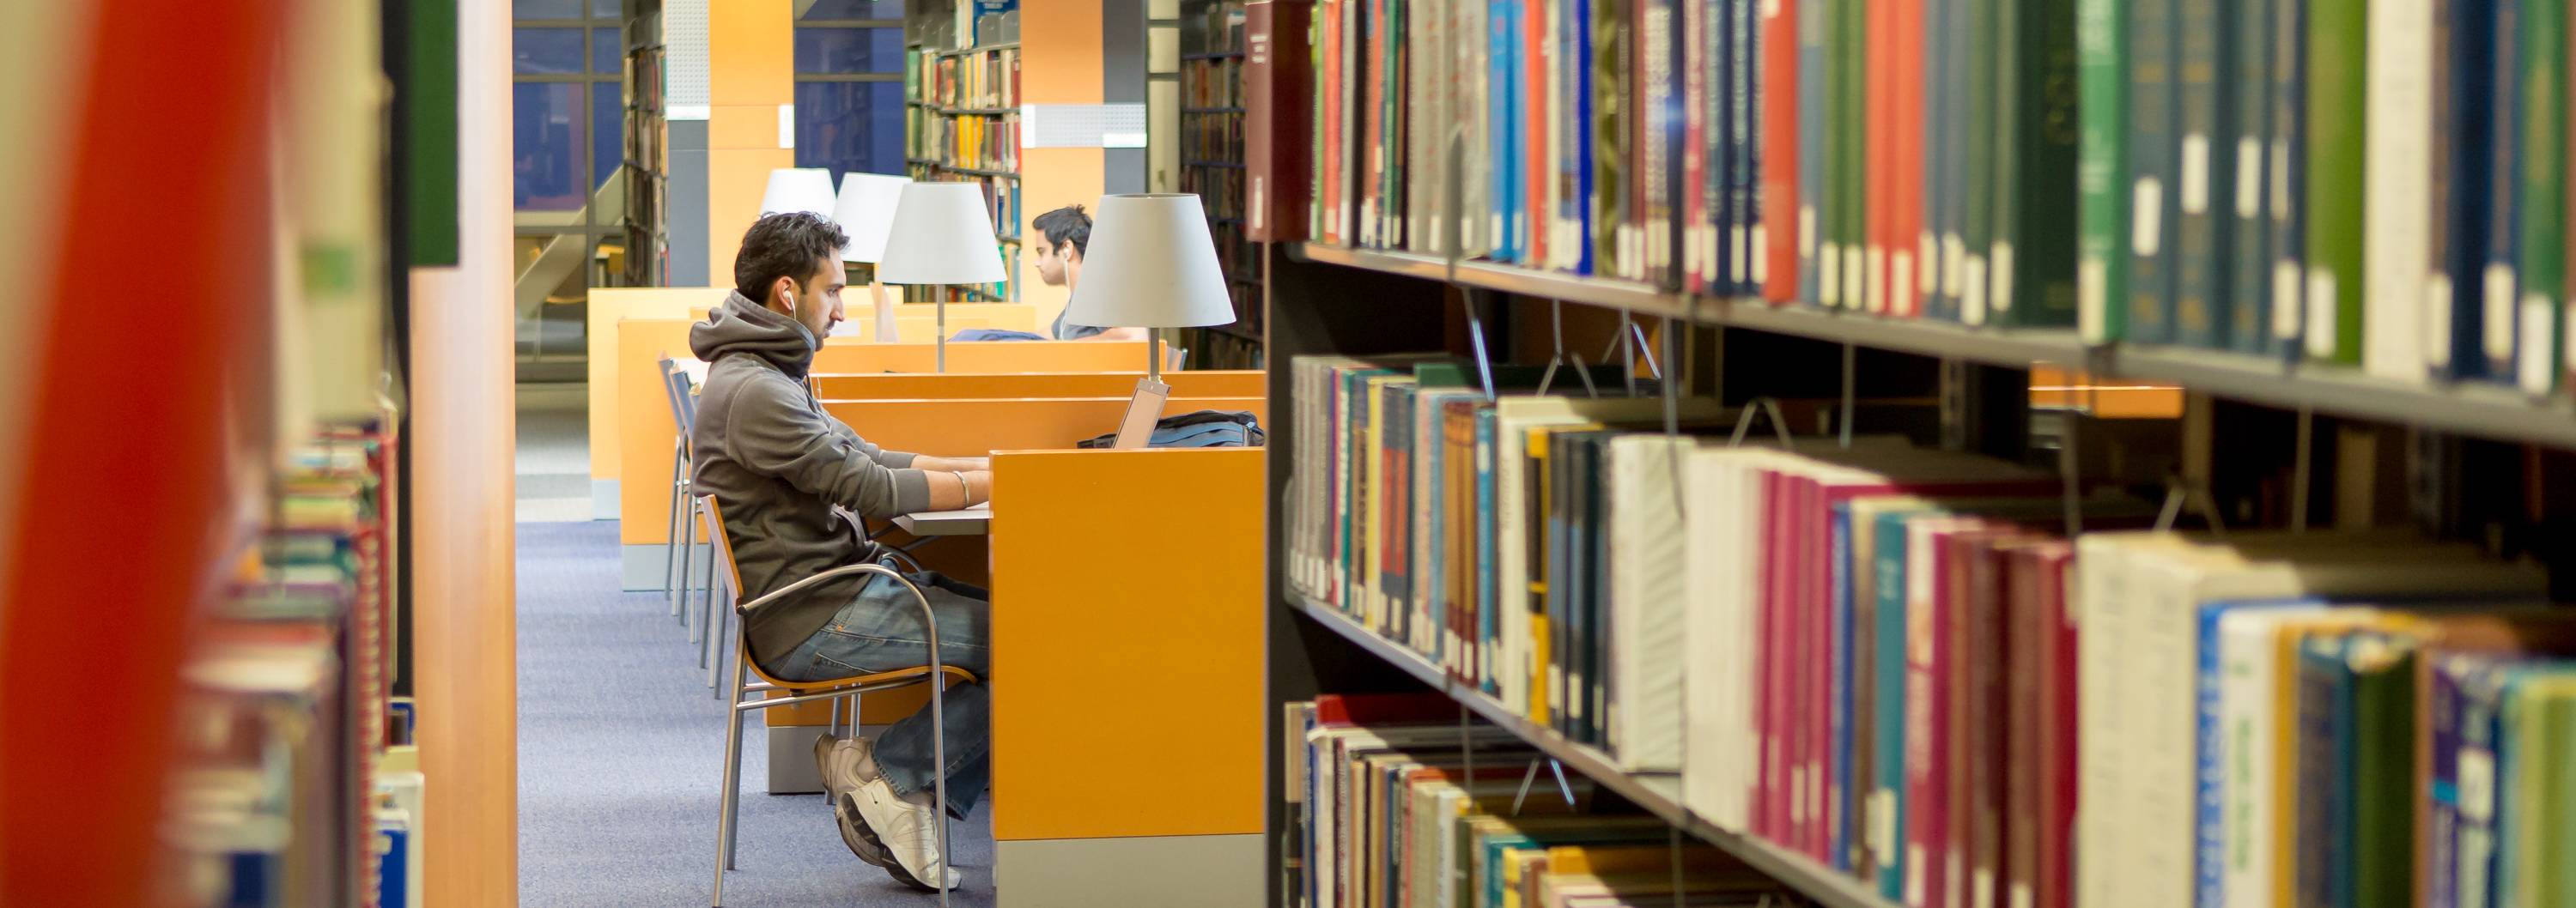 Student sits in a desk in the library, bookcases frames his figure in the chair.